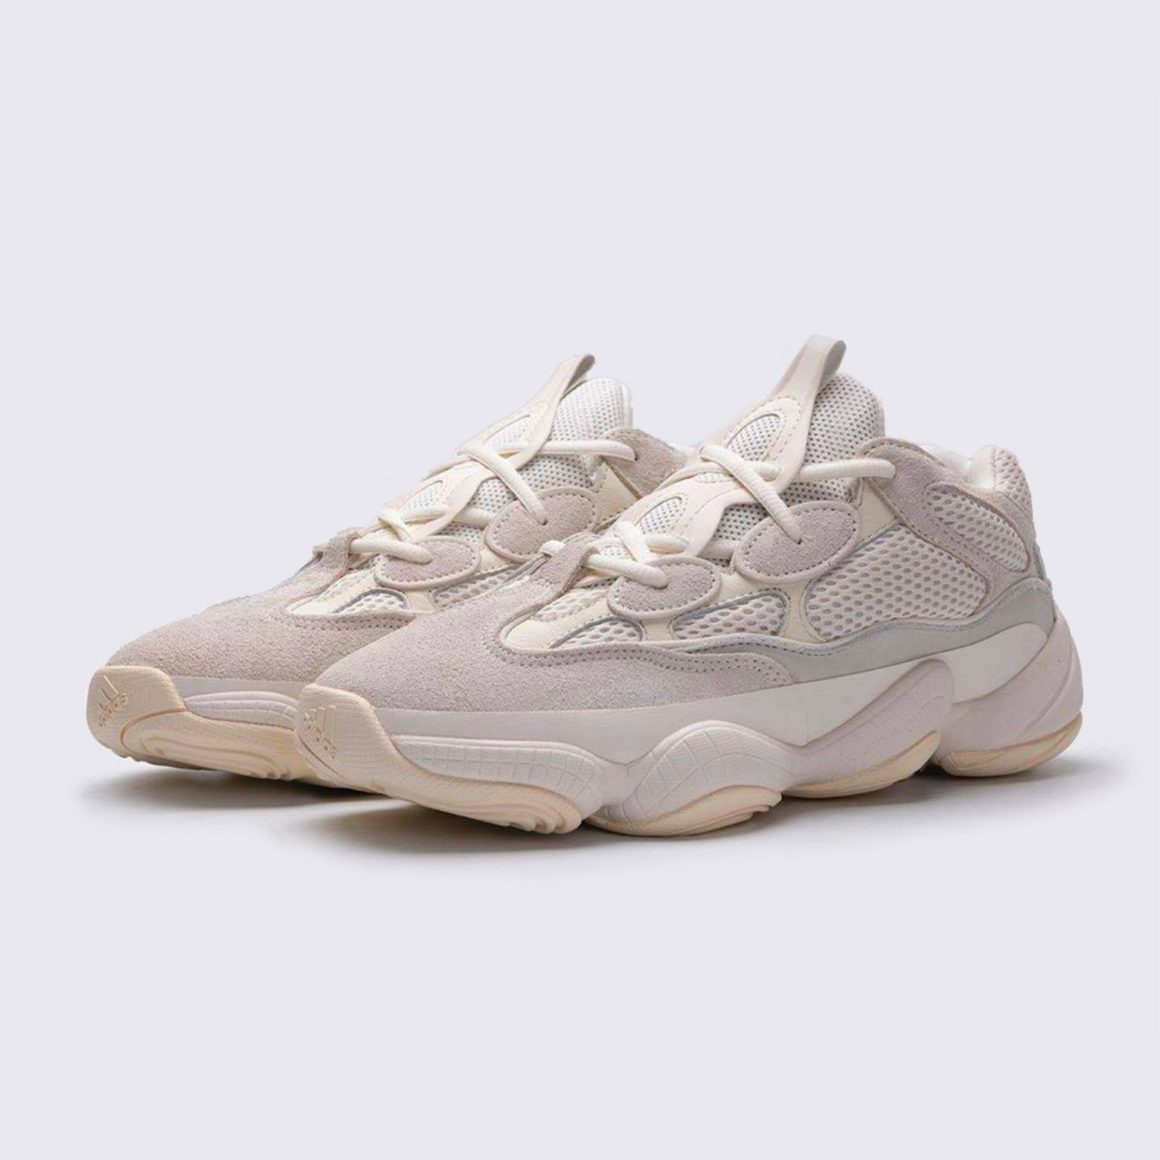 adidas Yeezy 500 Bone White - Nouvelles Images - Sneakers.fr